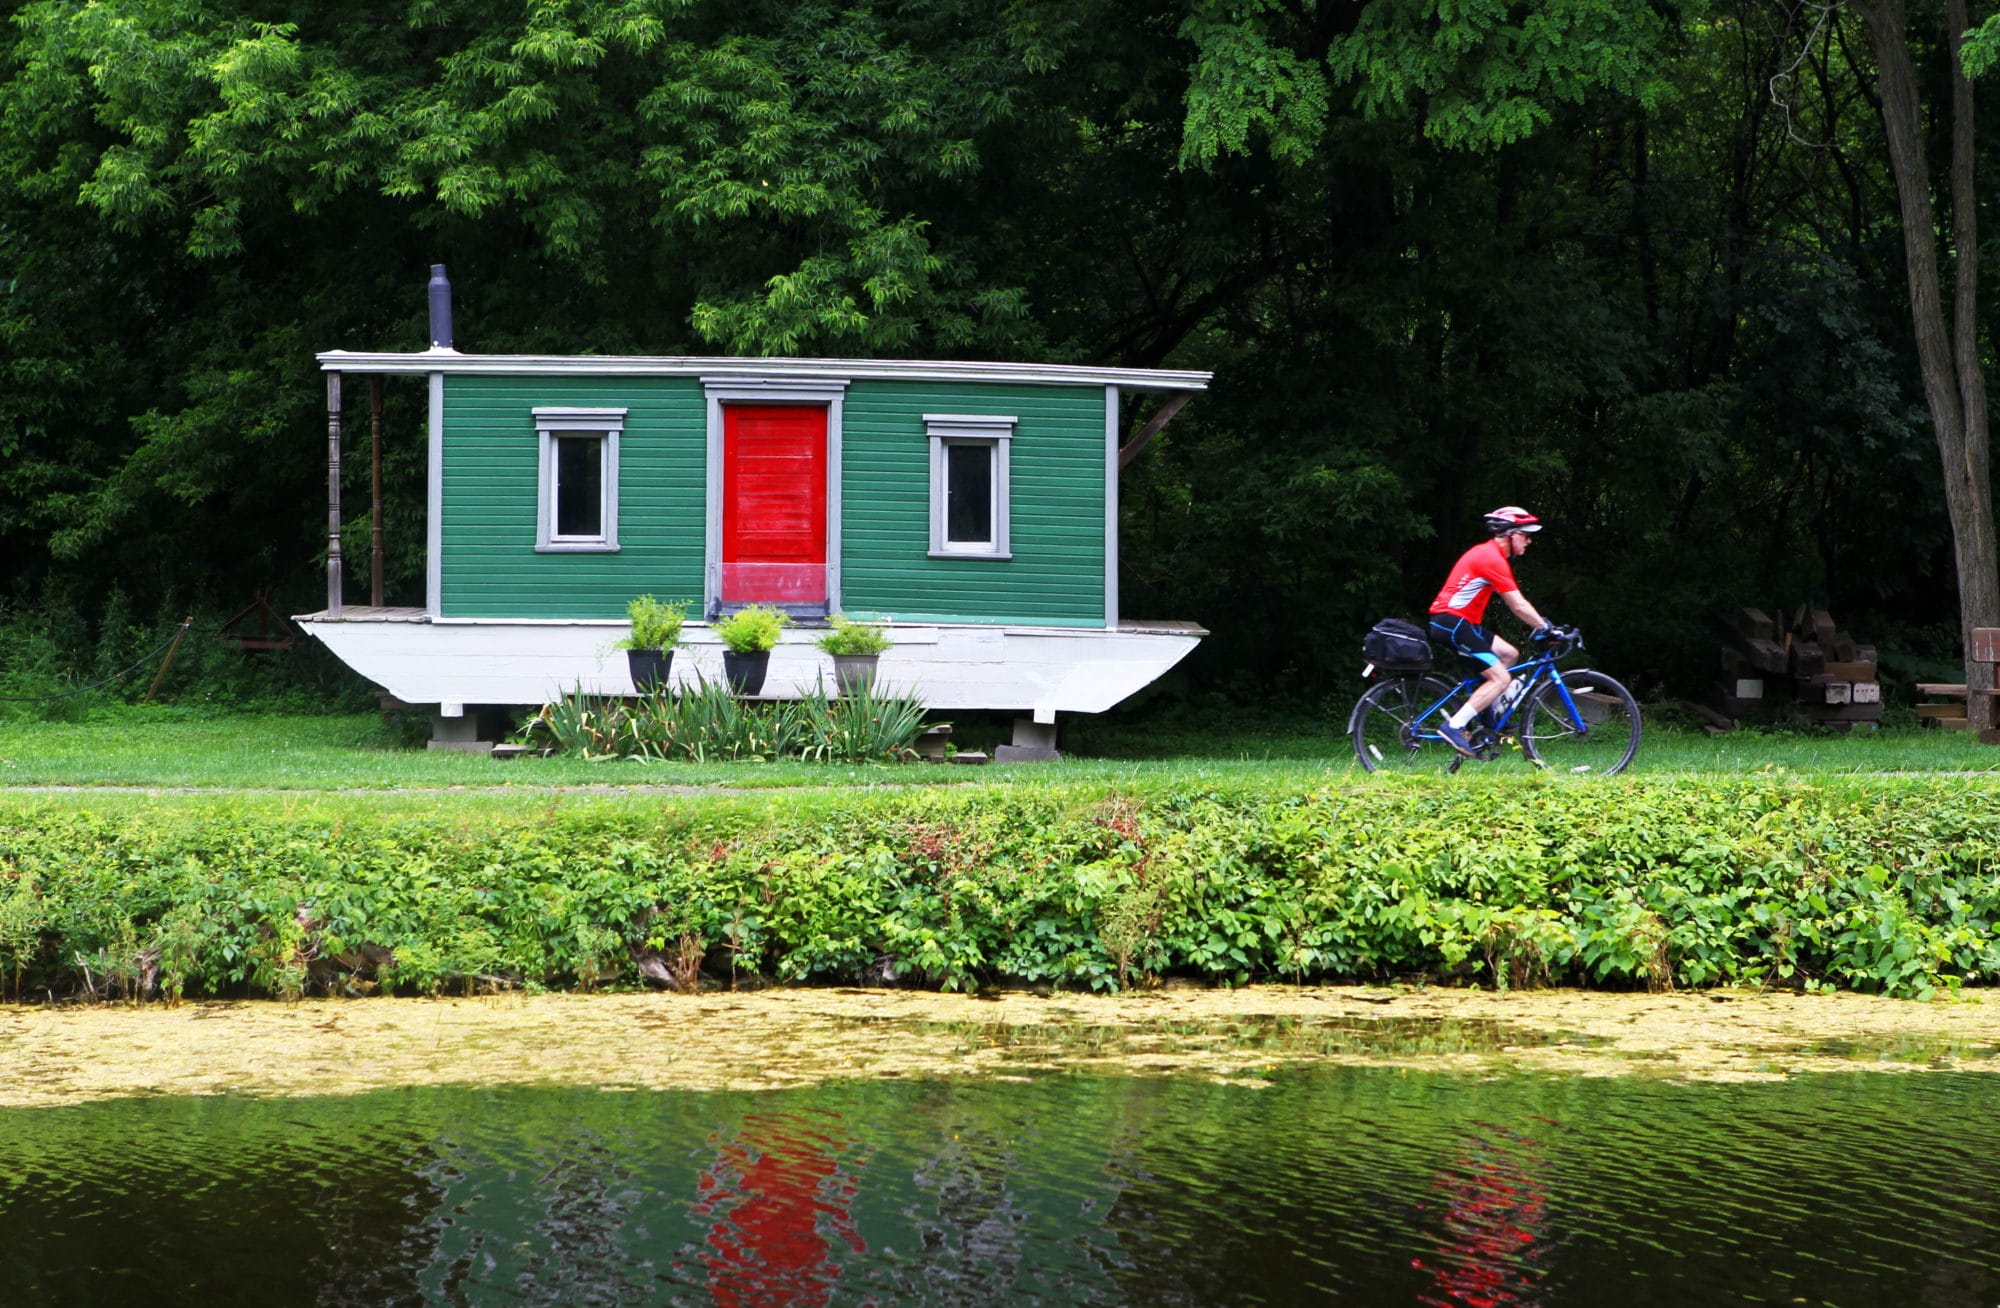 A cyclist rides past a red door of a houseboat, used as a home, in summer, along the Erie Canalway Trail, part of the longer Empire State Trail in New York State.